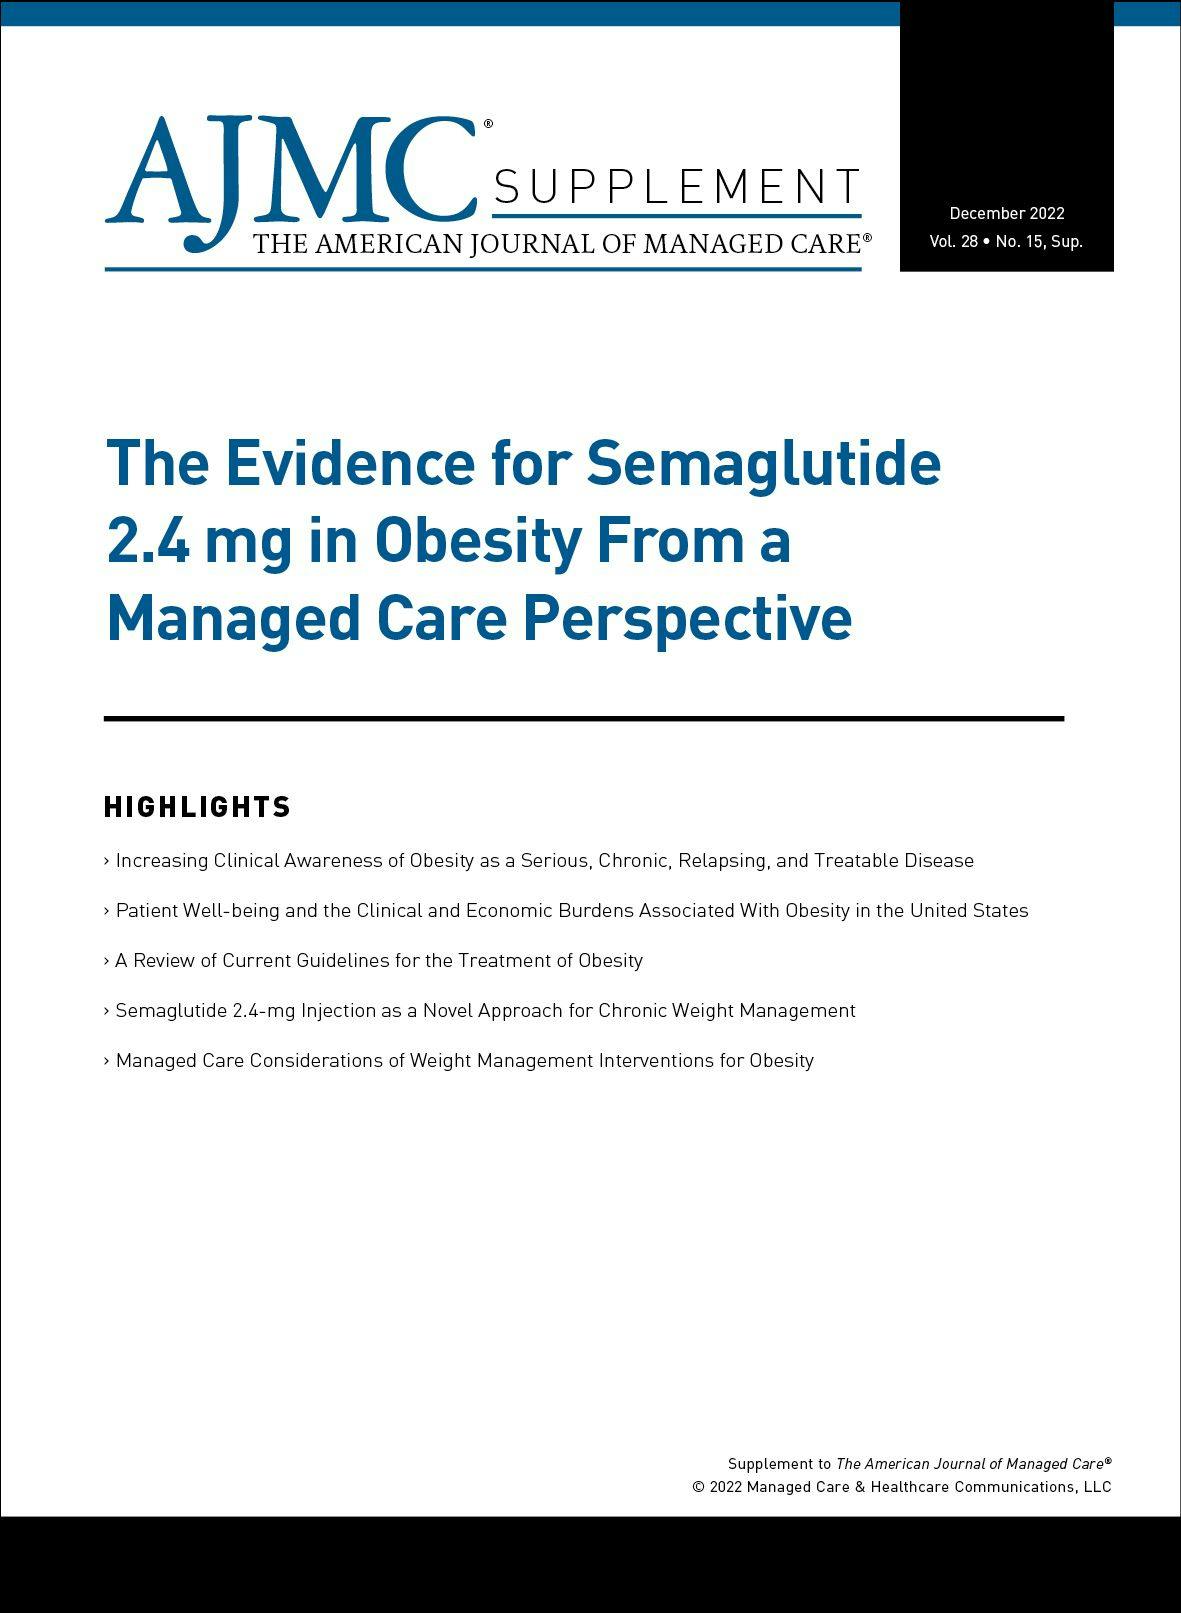 The Evidence for Semaglutide 2.4 mg in Obesity From a Managed Care Perspective